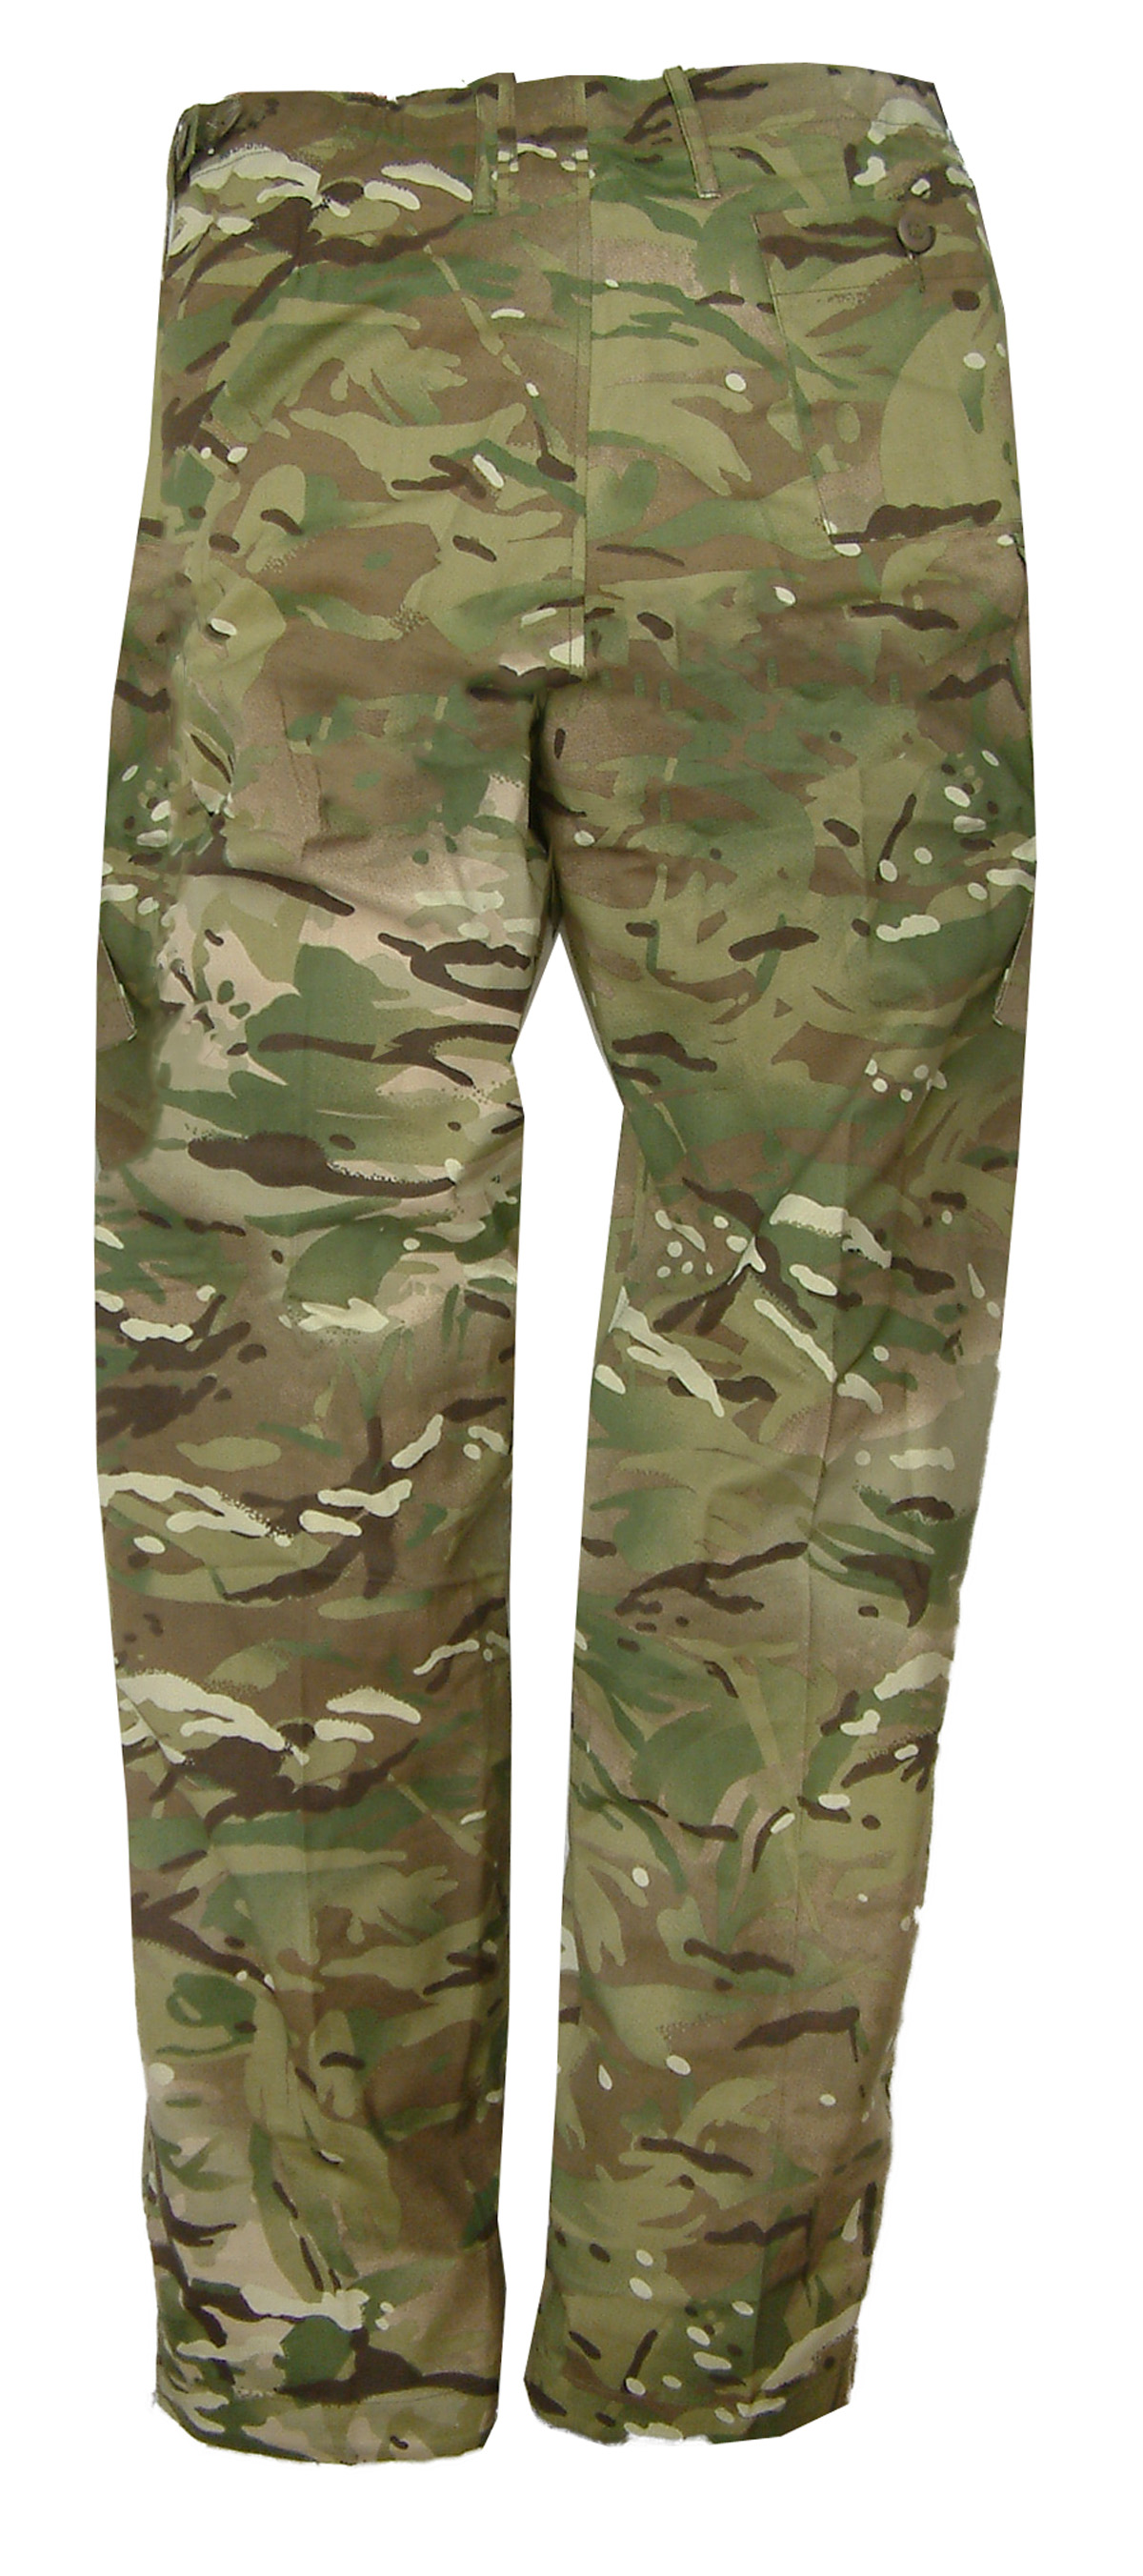 Used British MTP Combat Trousers (CS95 Issue) by British Army